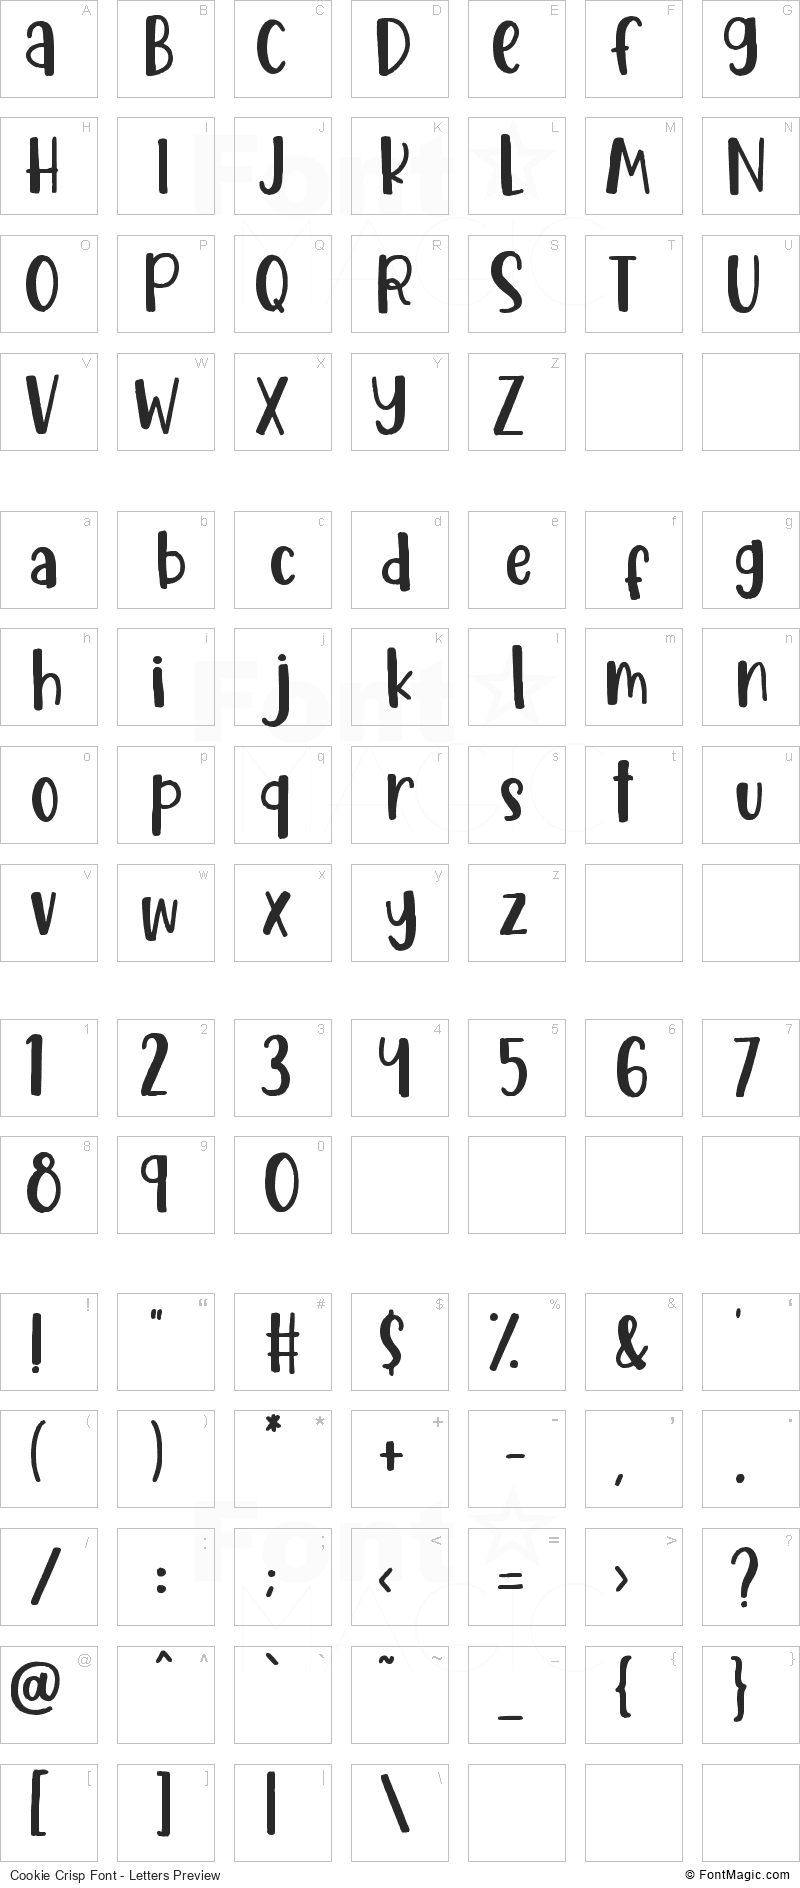 Cookie Crisp Font - All Latters Preview Chart